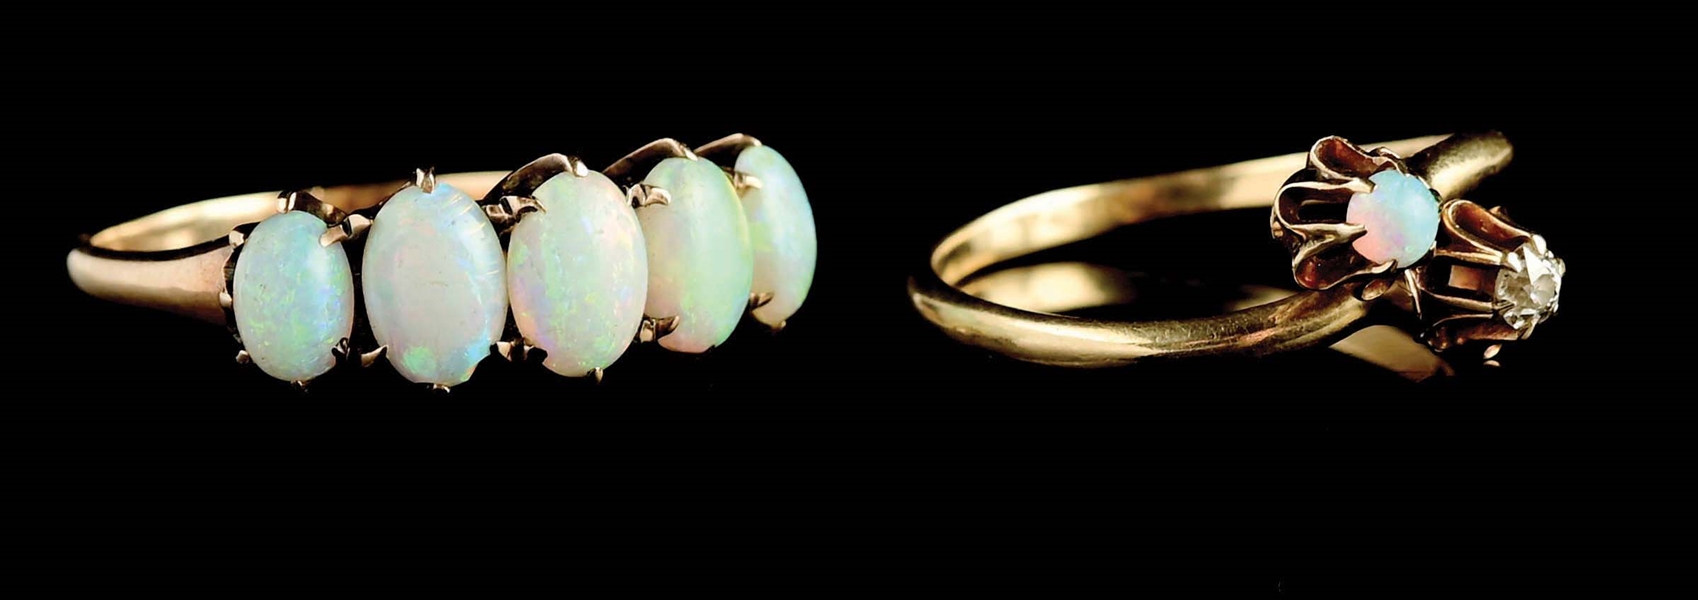 LOT OF 2: ANTIQUE YELLOW GOLD OPAL RINGS.